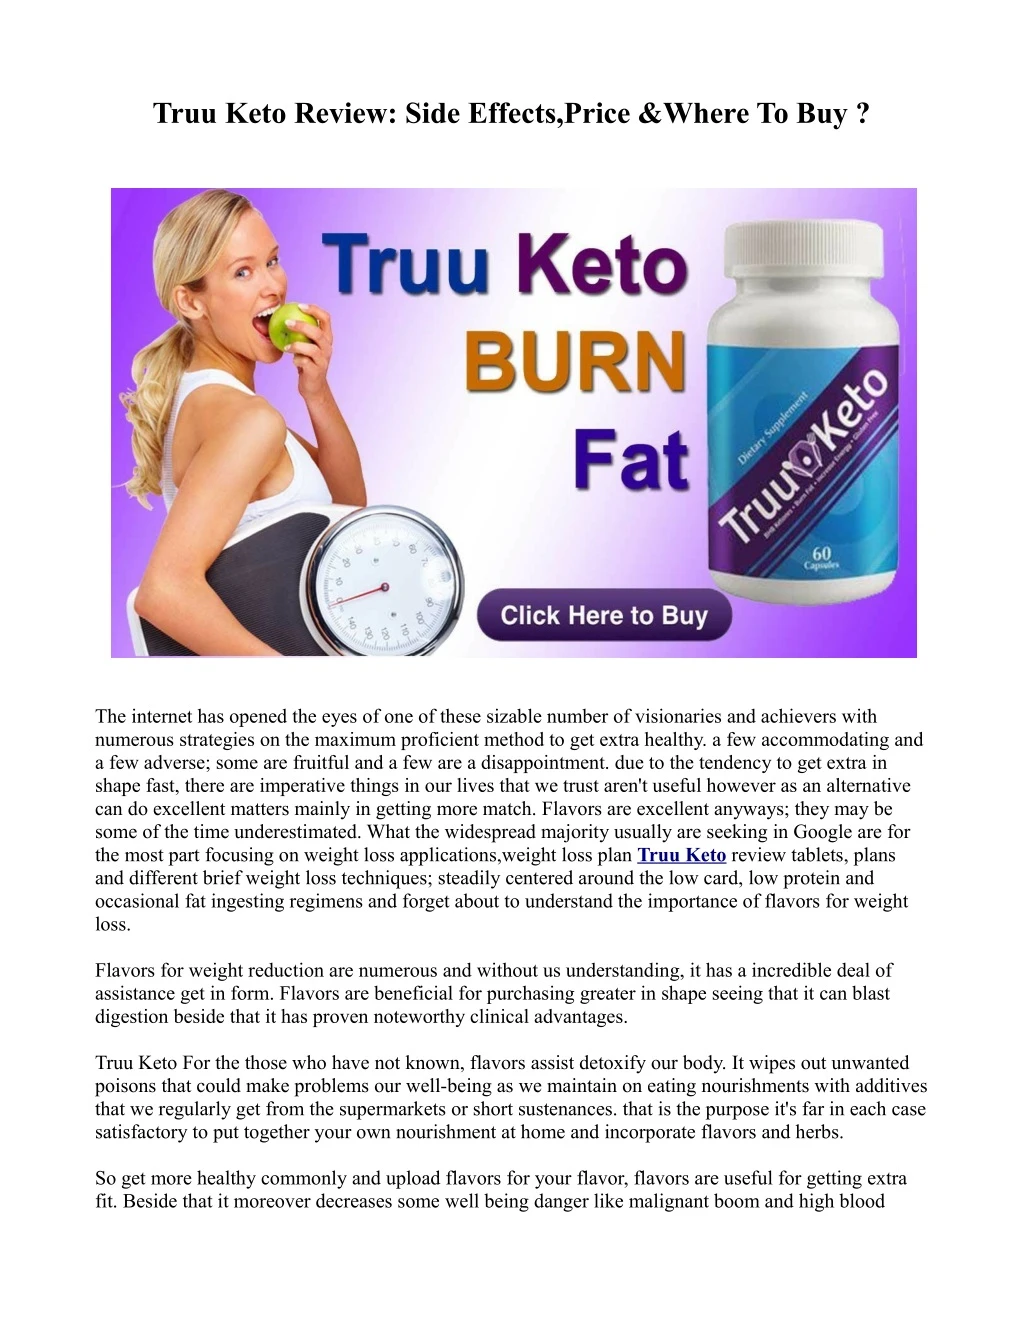 truu keto review side effects price where to buy